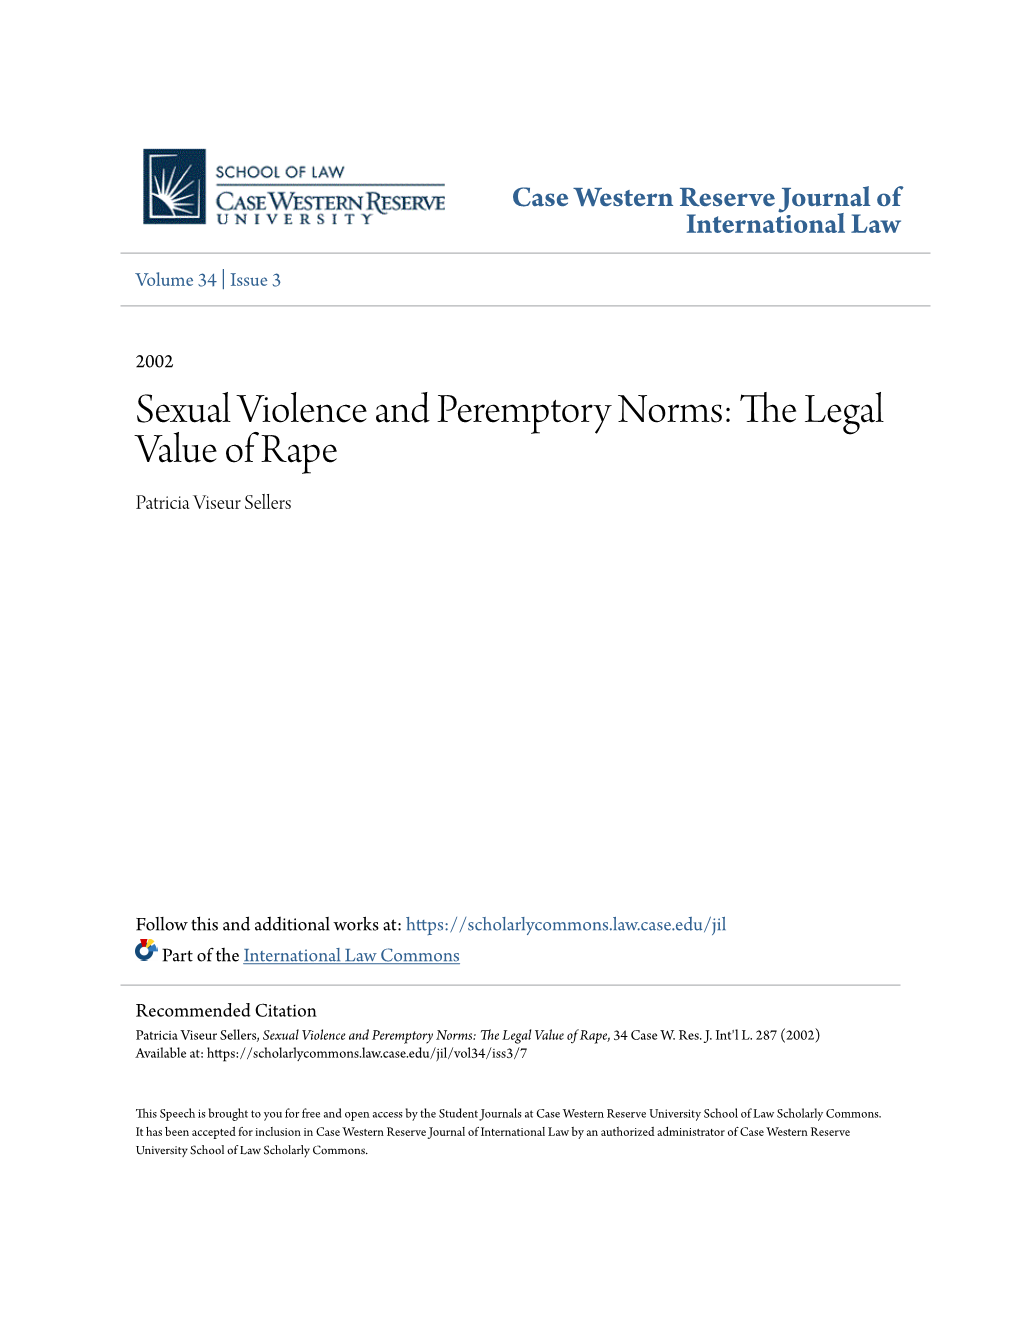 Sexual Violence and Peremptory Norms: the Legal Value of Rape Patricia Viseur Sellers